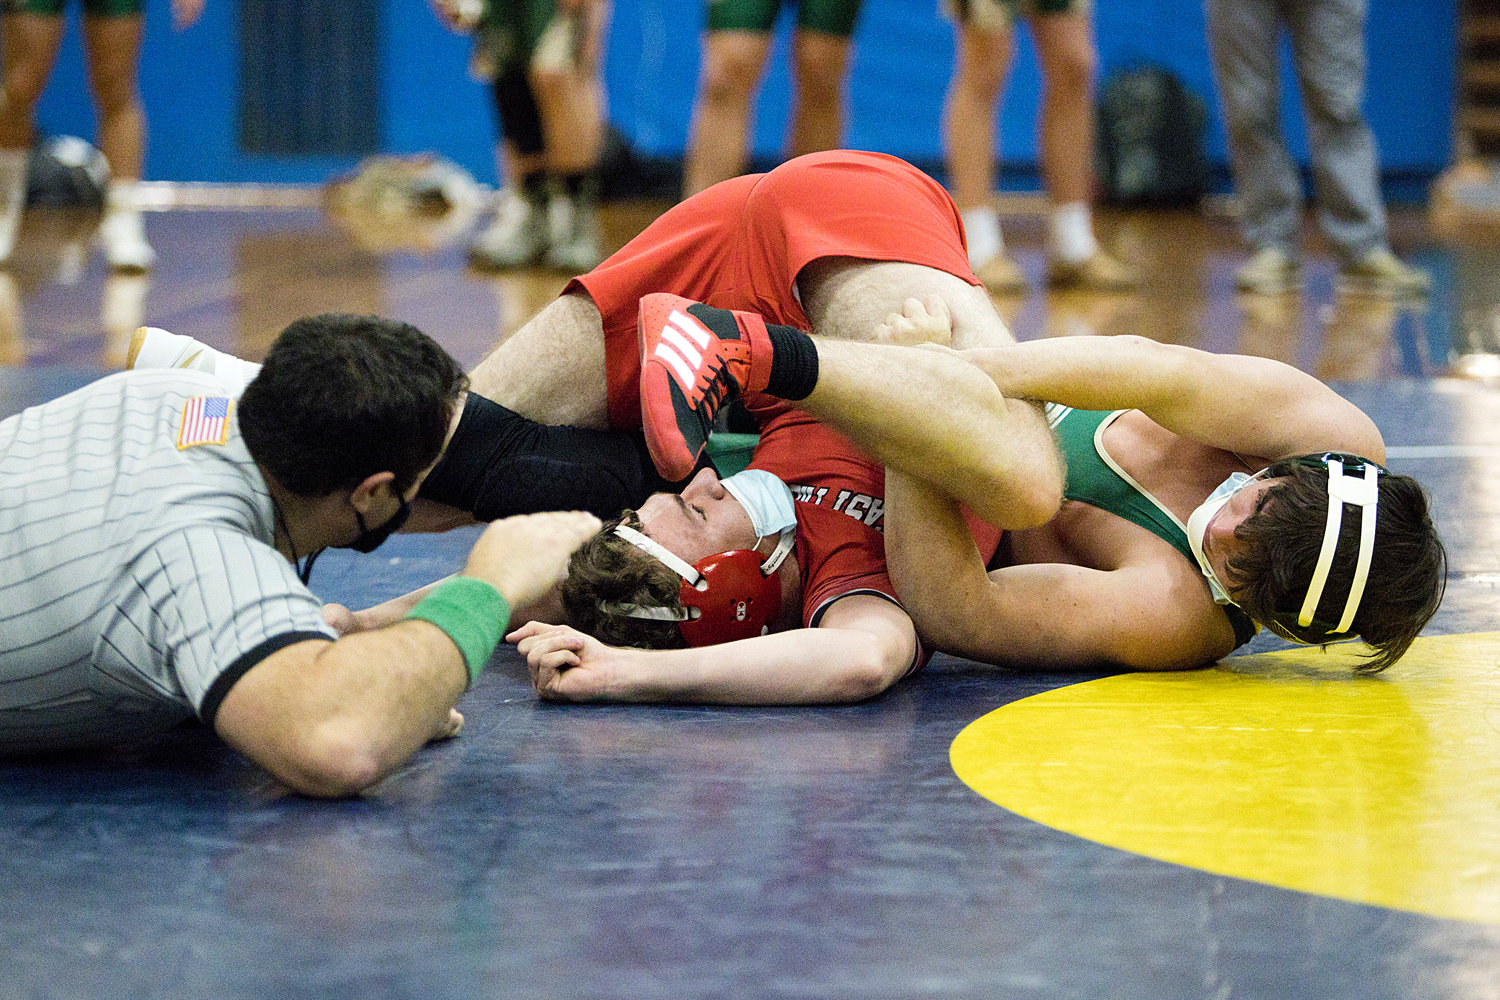 Isacc Peterson attempts to free himself from a Hendricken opponent while wrestling in the 160lb, weight class.